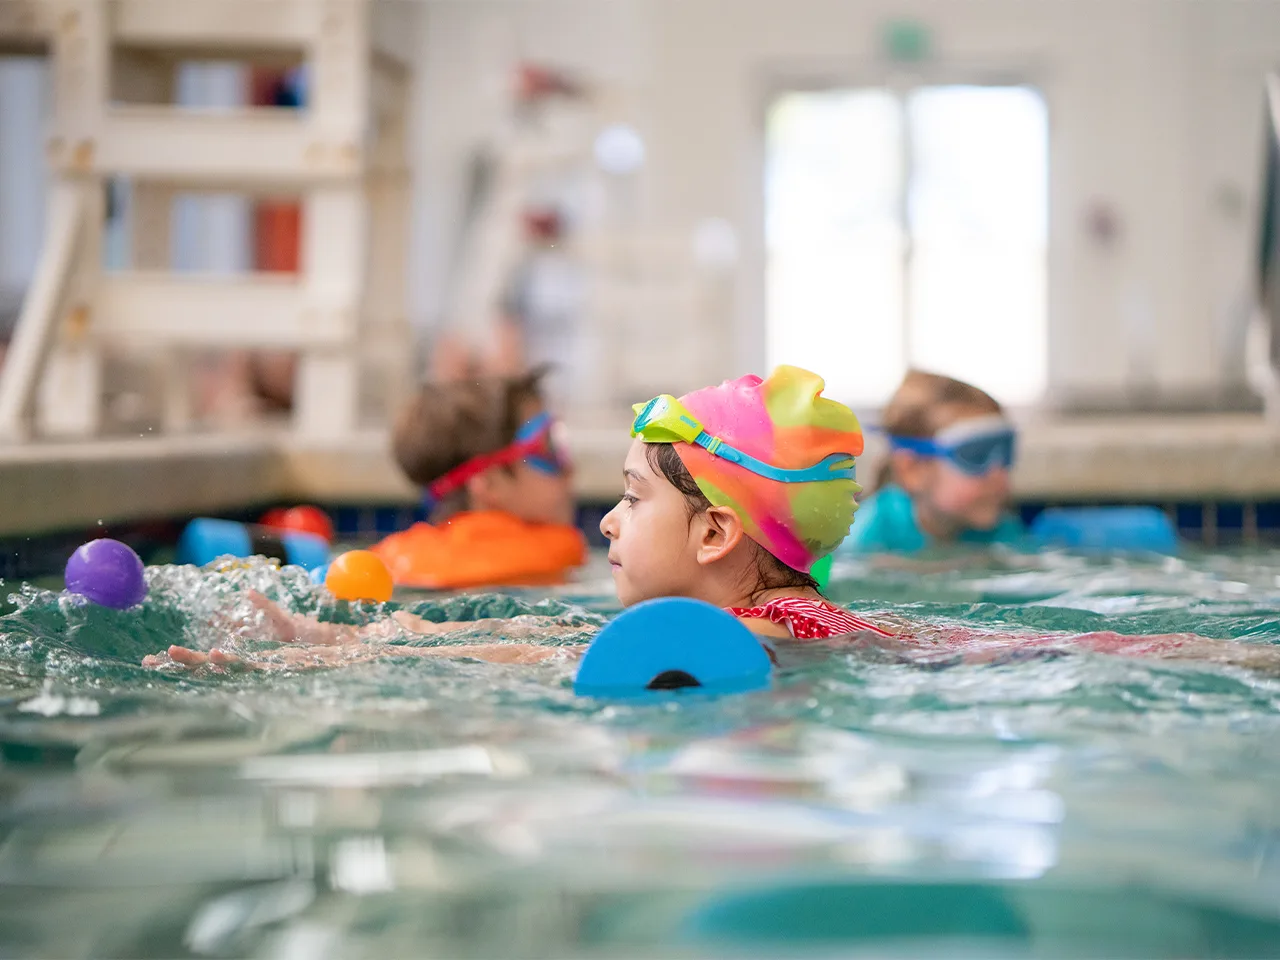 a child wearing a colorful swim cap participates in a swimming lesson in a pool.